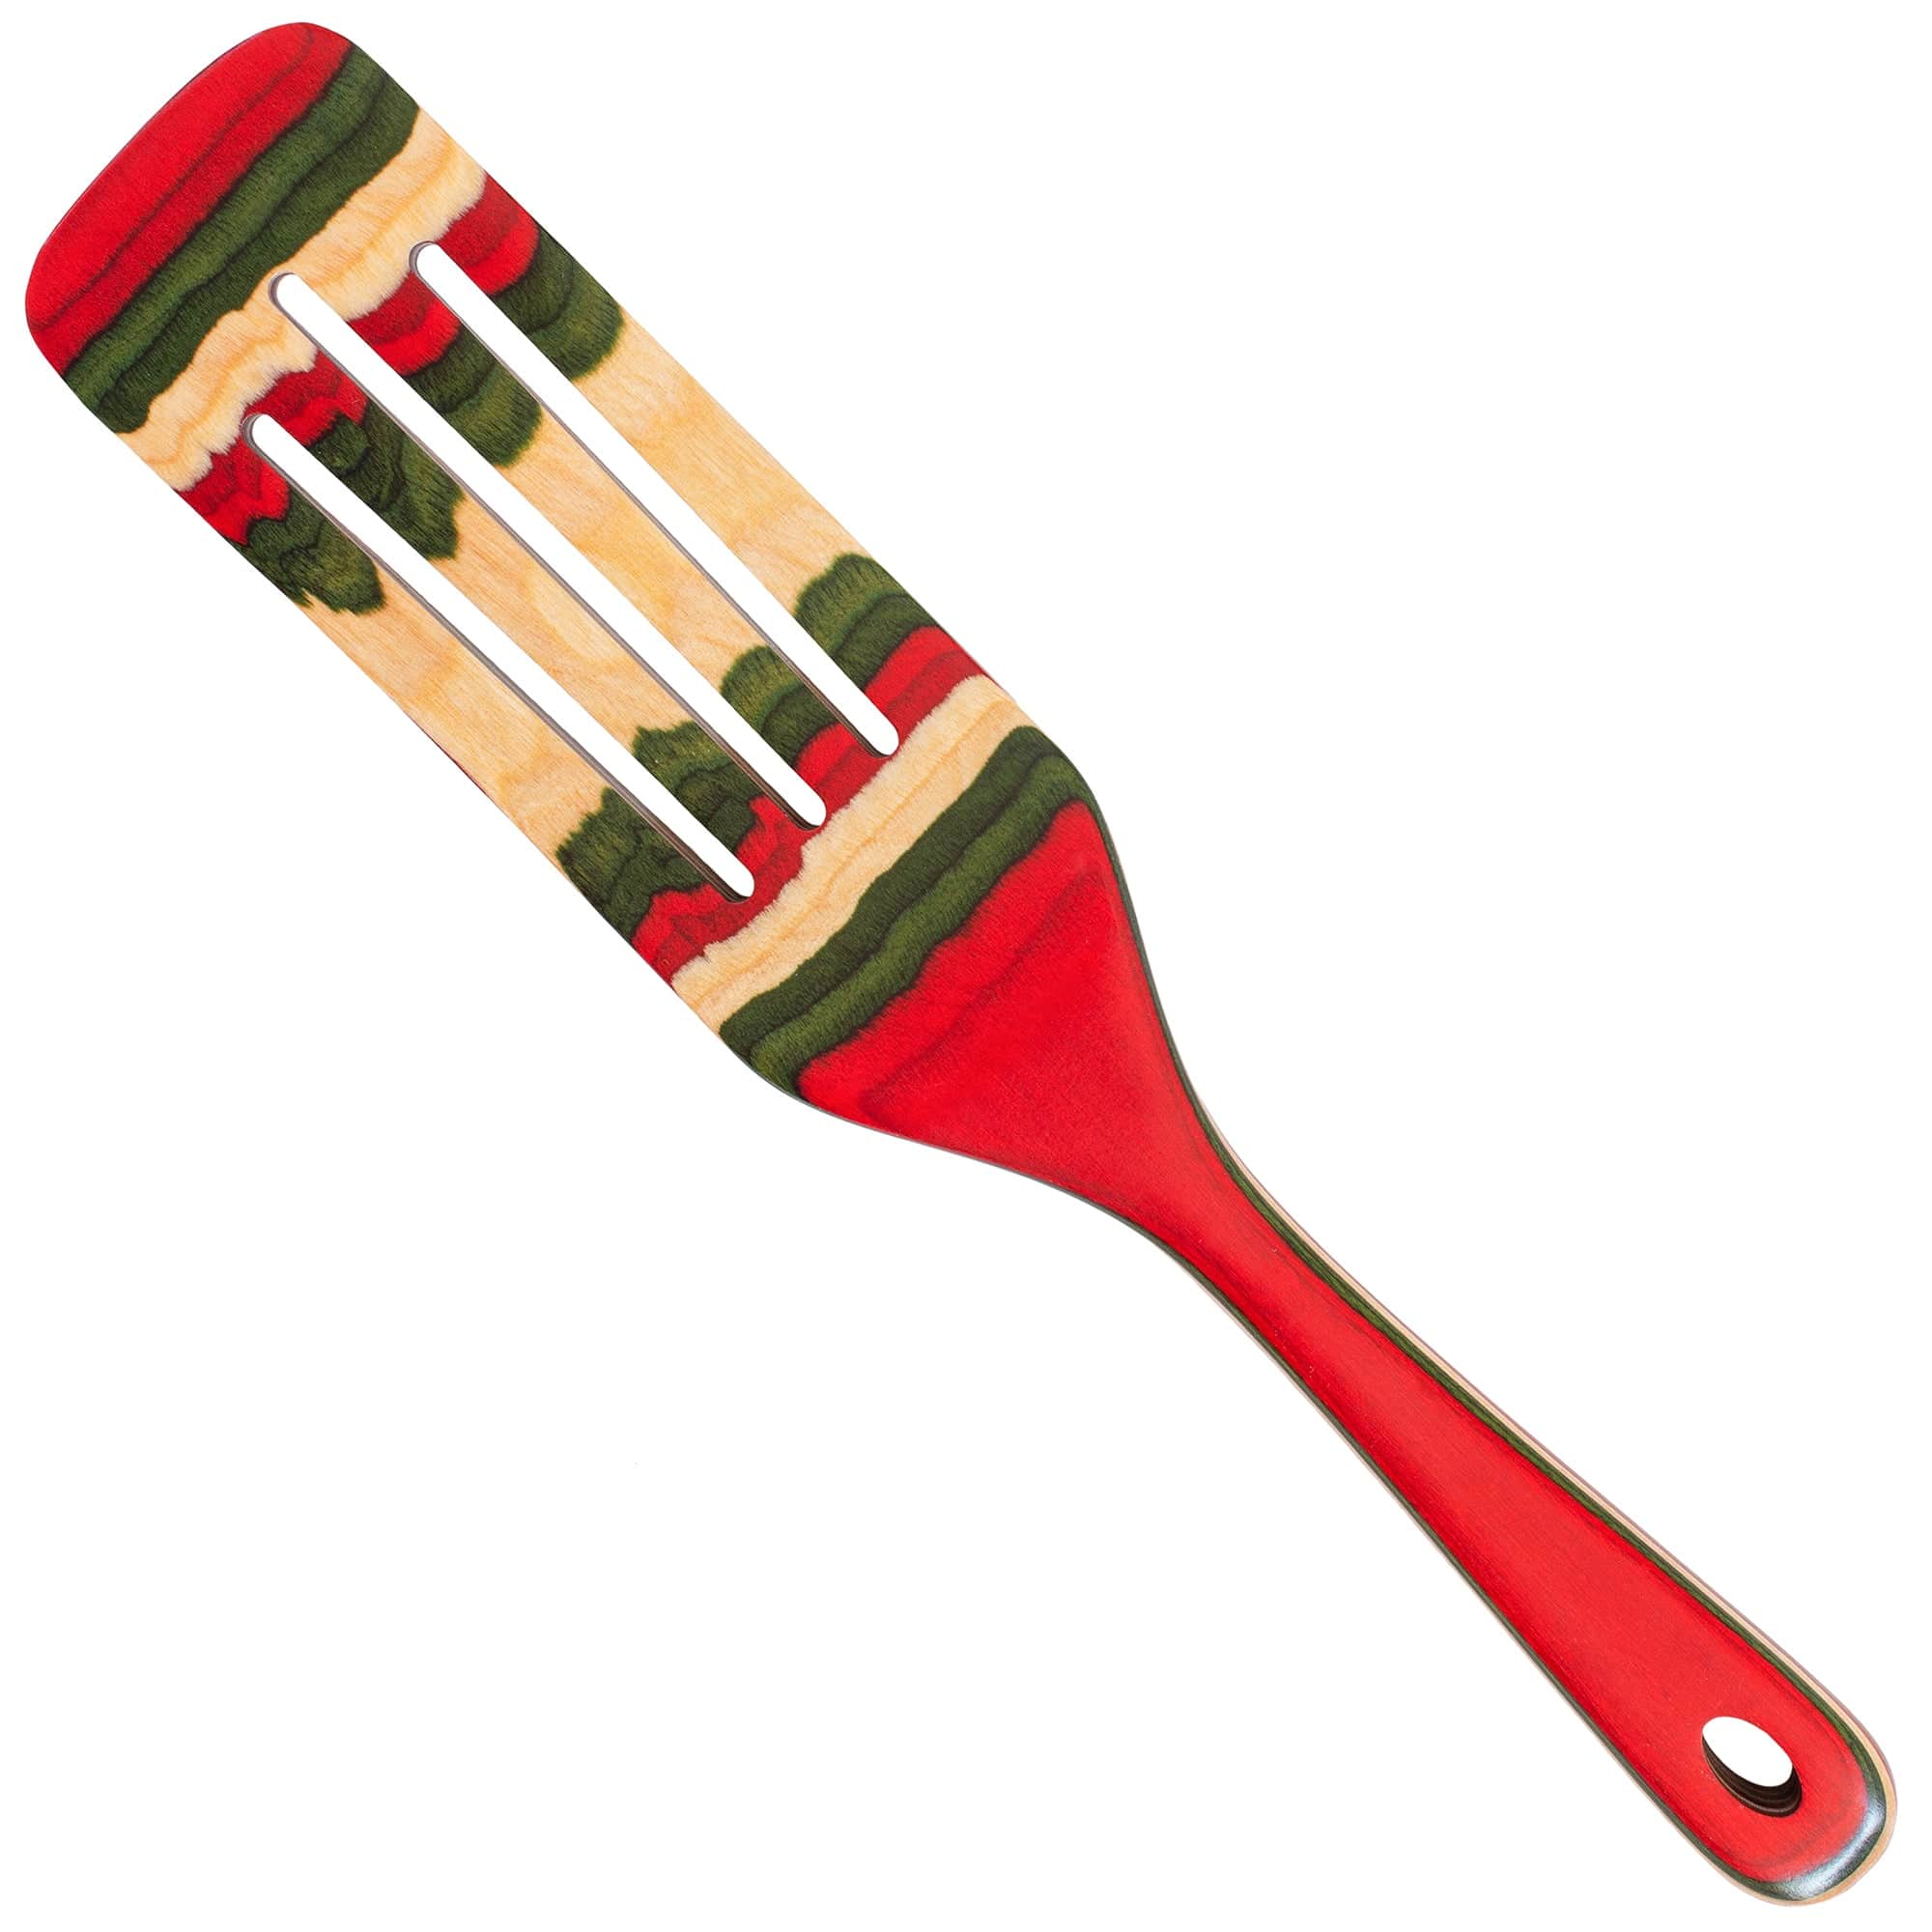 Baltique® North Pole Collection – Spurtle Kitchen Utensil – Totally Bamboo